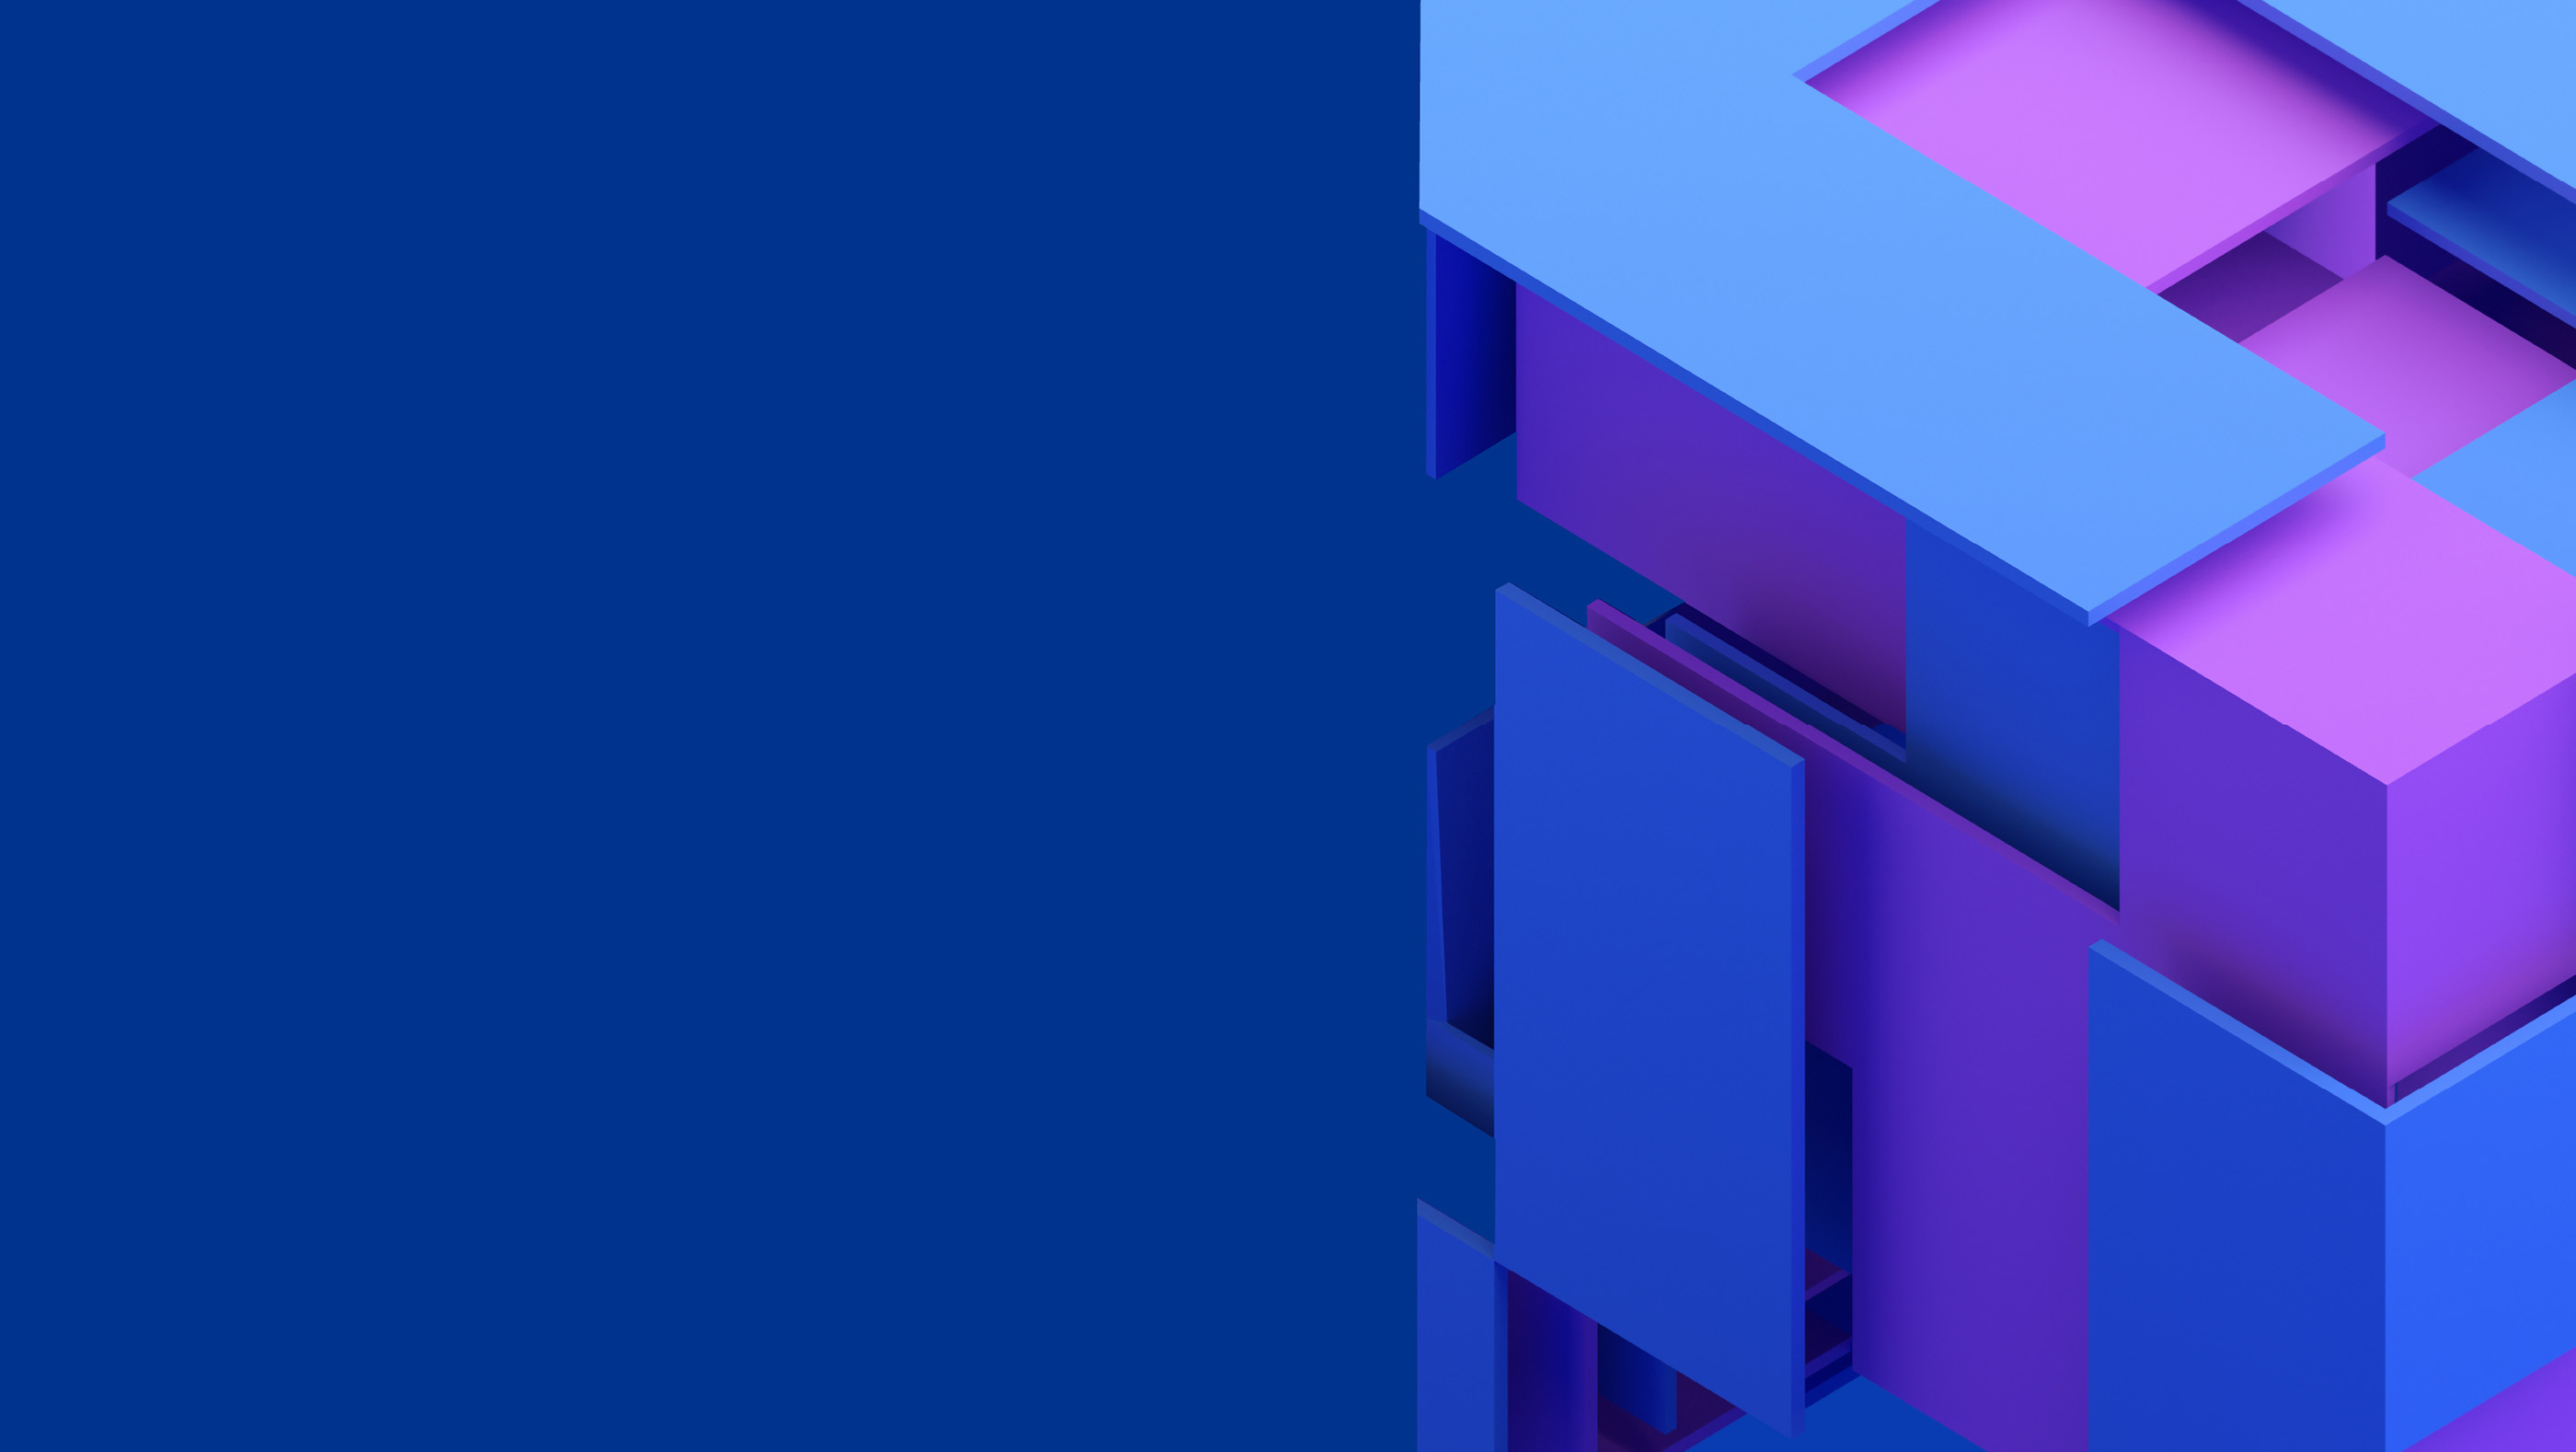 abstract art: purple and blue cubes